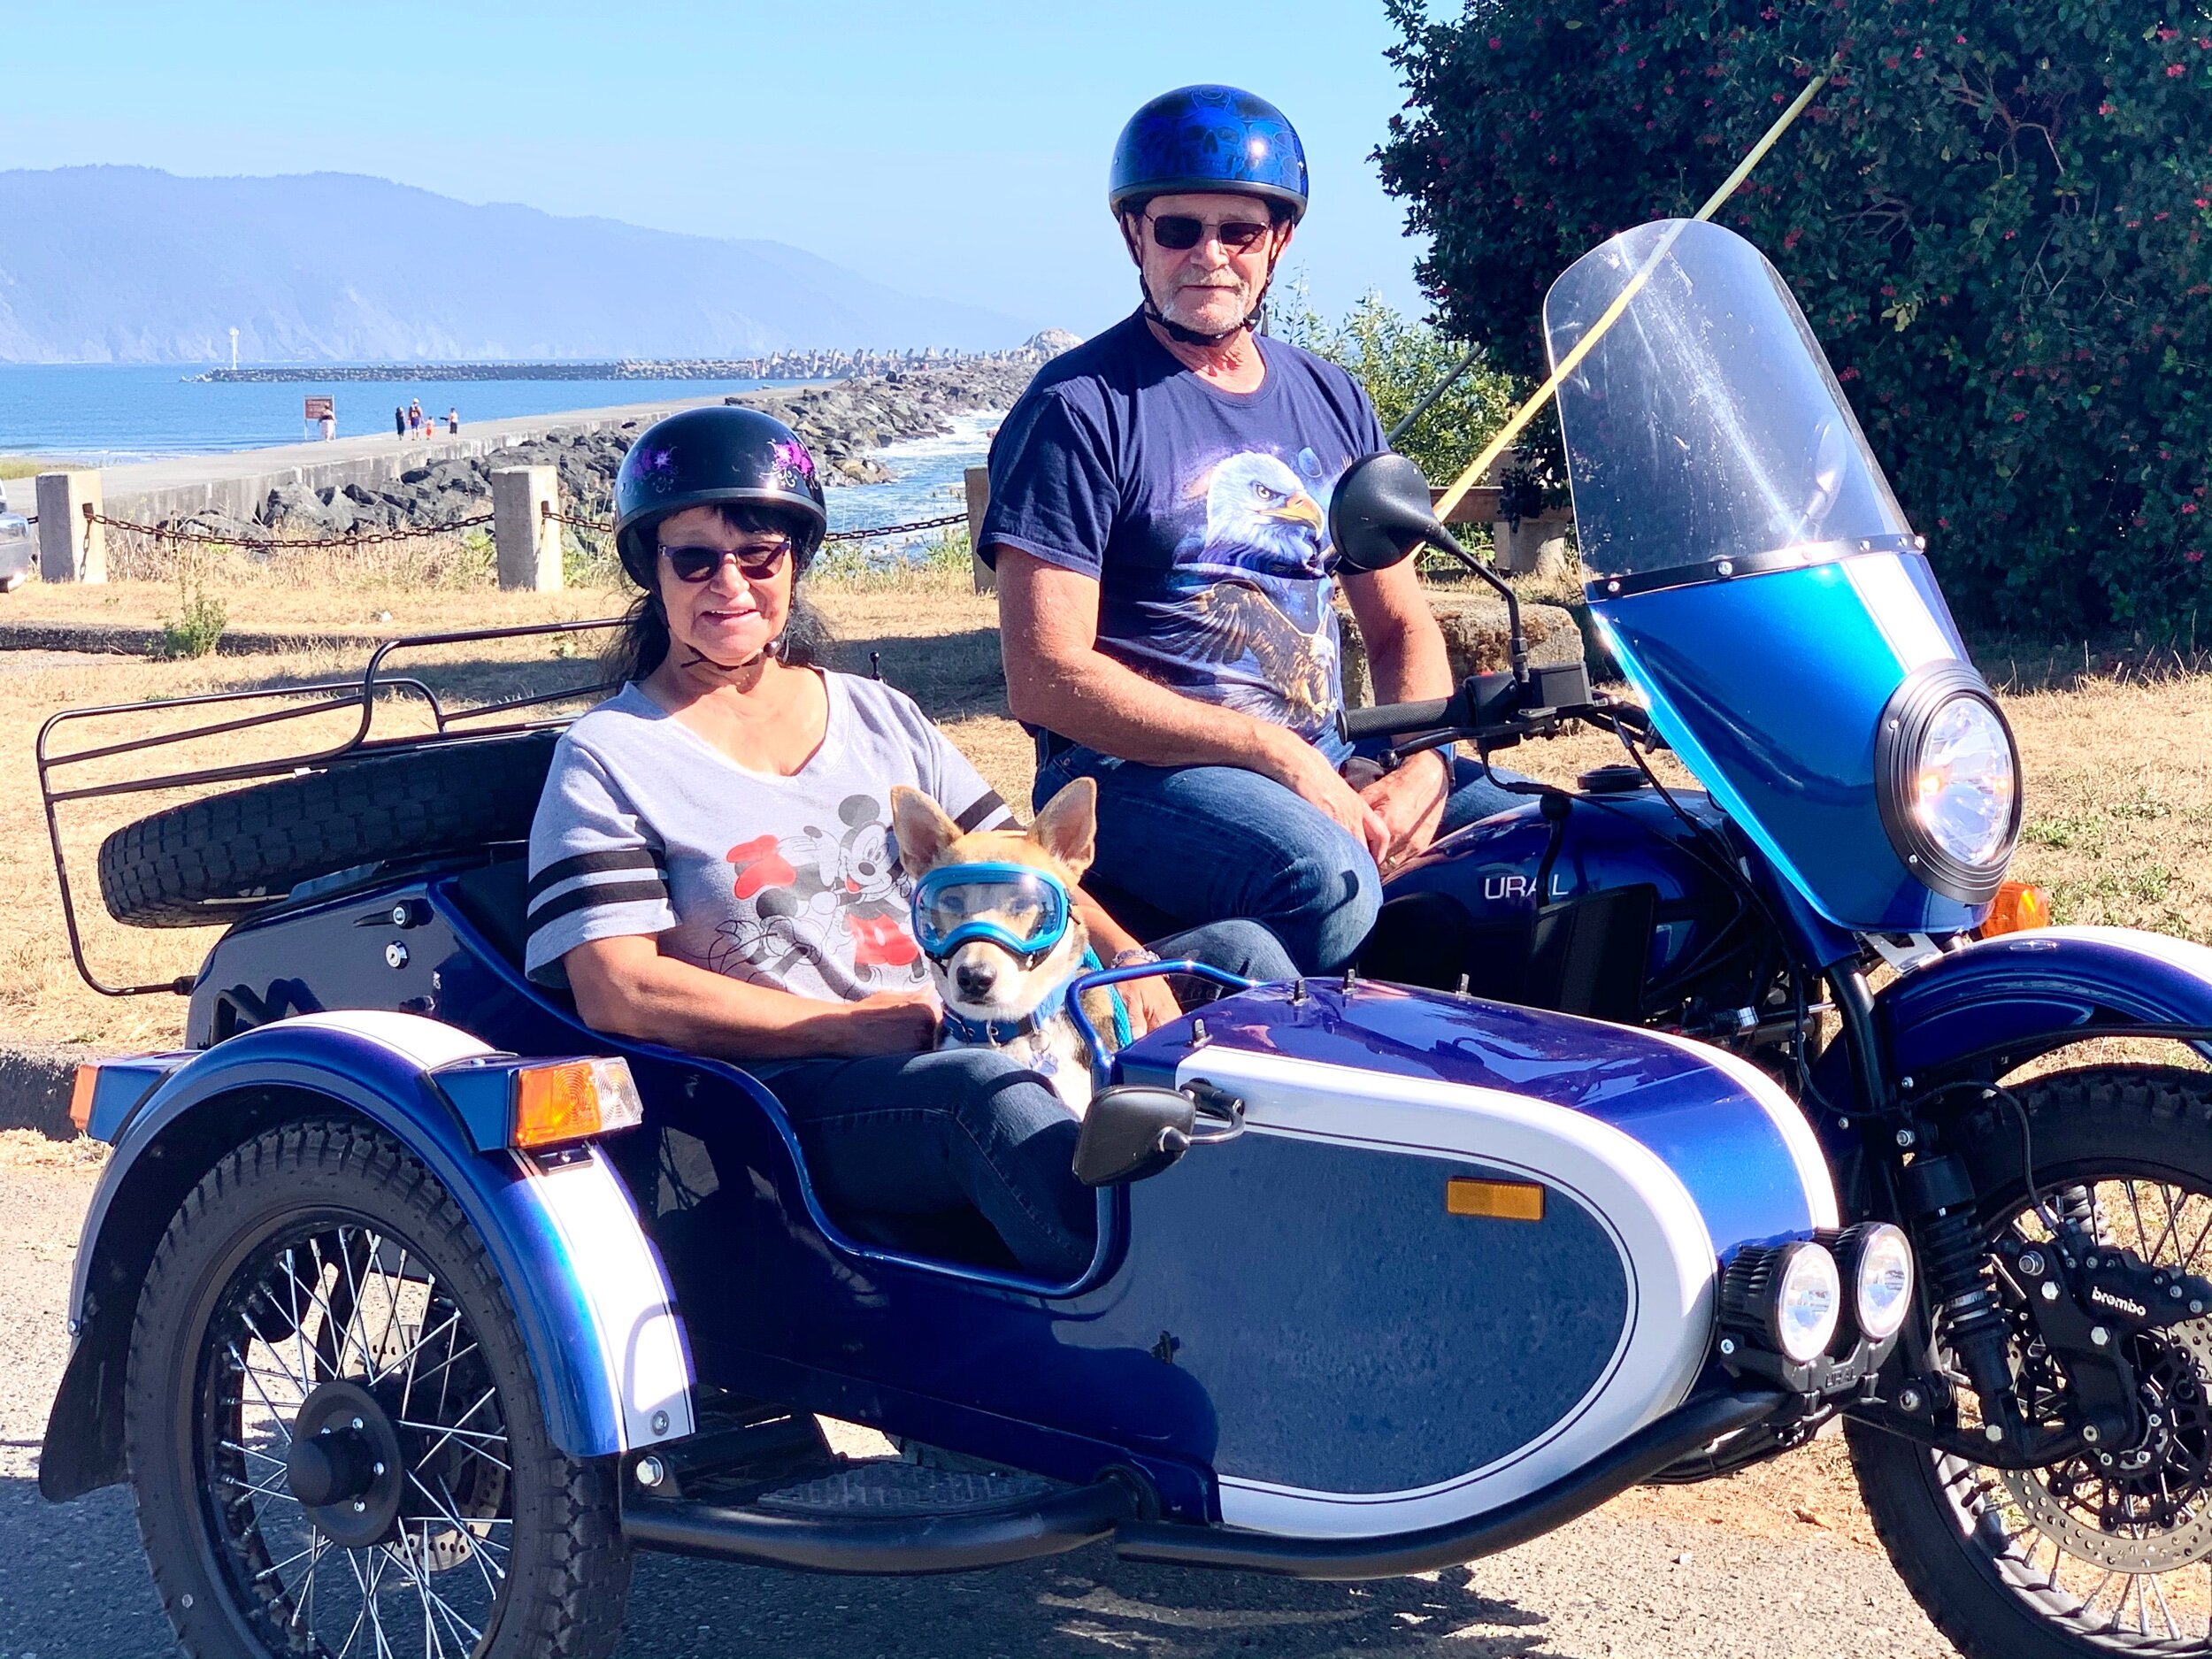  In Crescent City, California, we talked to this nice couple and their adorable, goggle-wearing dog. He did not enjoy the rides before goggles, but now with his new eyewear, he's good to go anytime! 